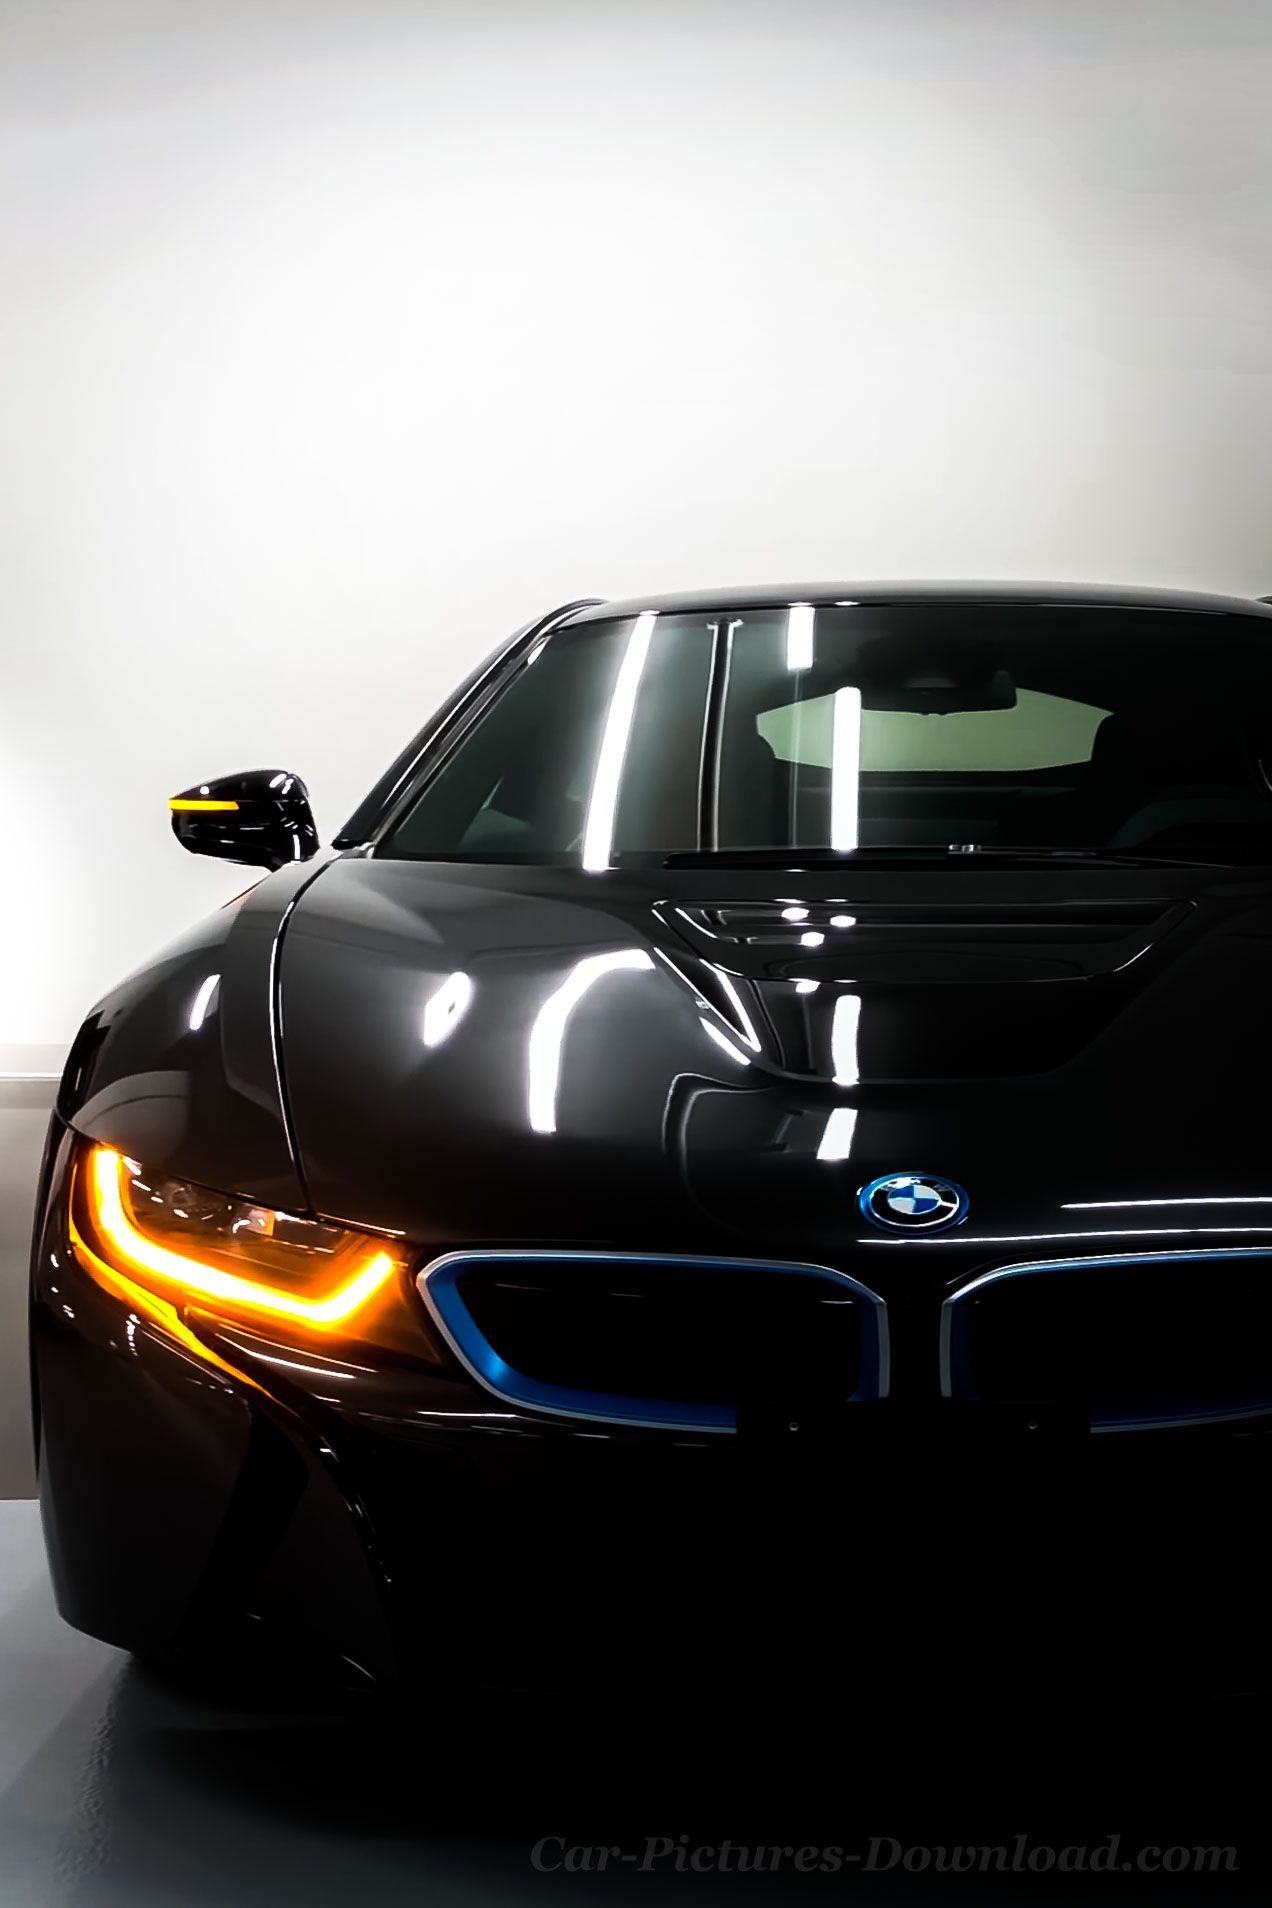 HD Android BMW Wallpaper